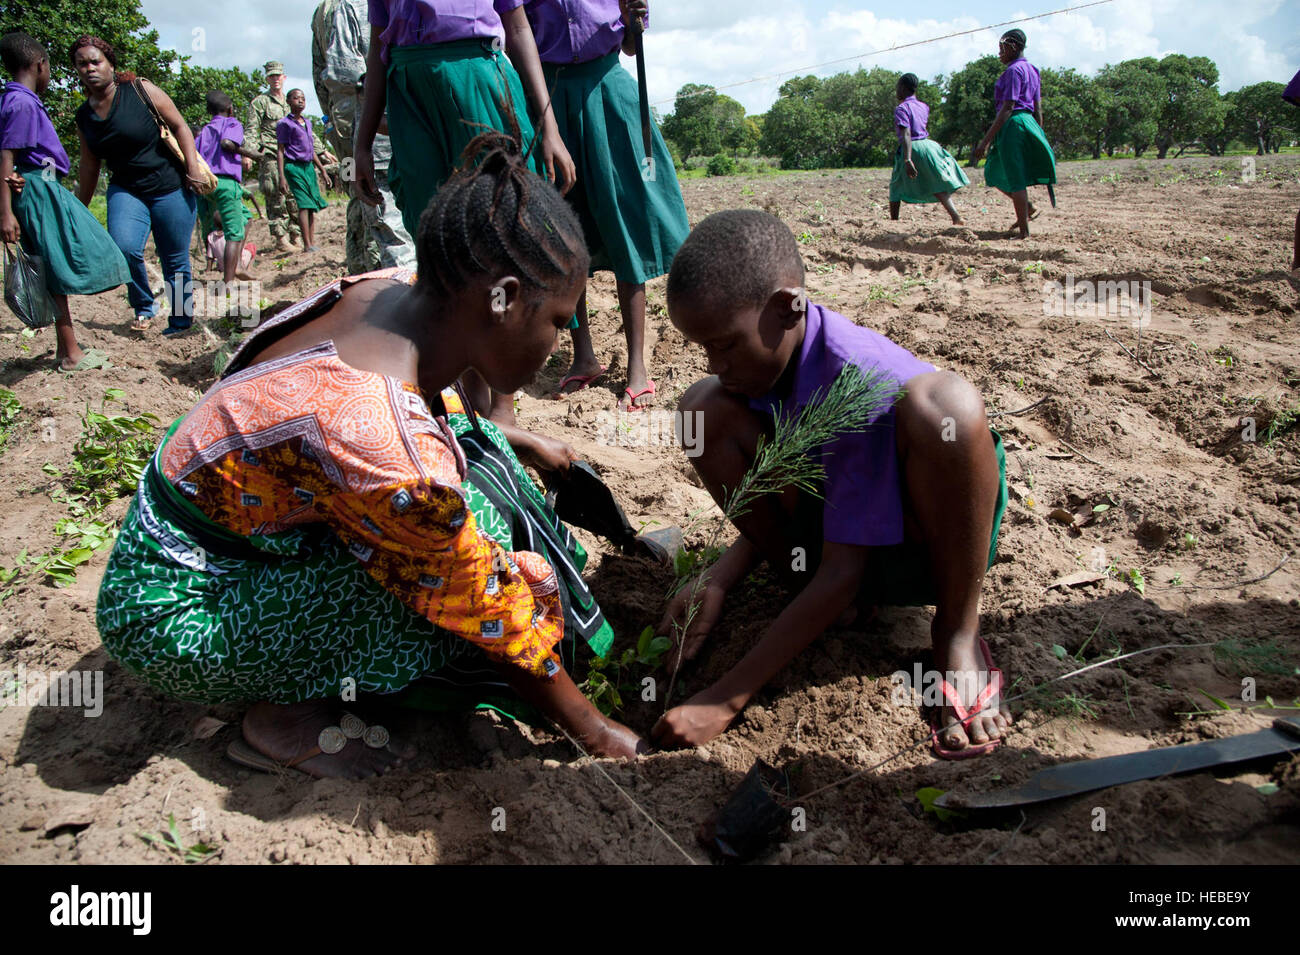 A Kenyan woman and boy dig a hole to plant a Casuarina tree at the Mjanaheri Primary School June 5. U.S. Navy Maritime Civil Affairs Team 112, Combined Joint Task Force - Horn of Africa, and other organizations planted nearly 600 Casuarina tree seedlings at the school in celebration of World Environment Day. Stock Photo